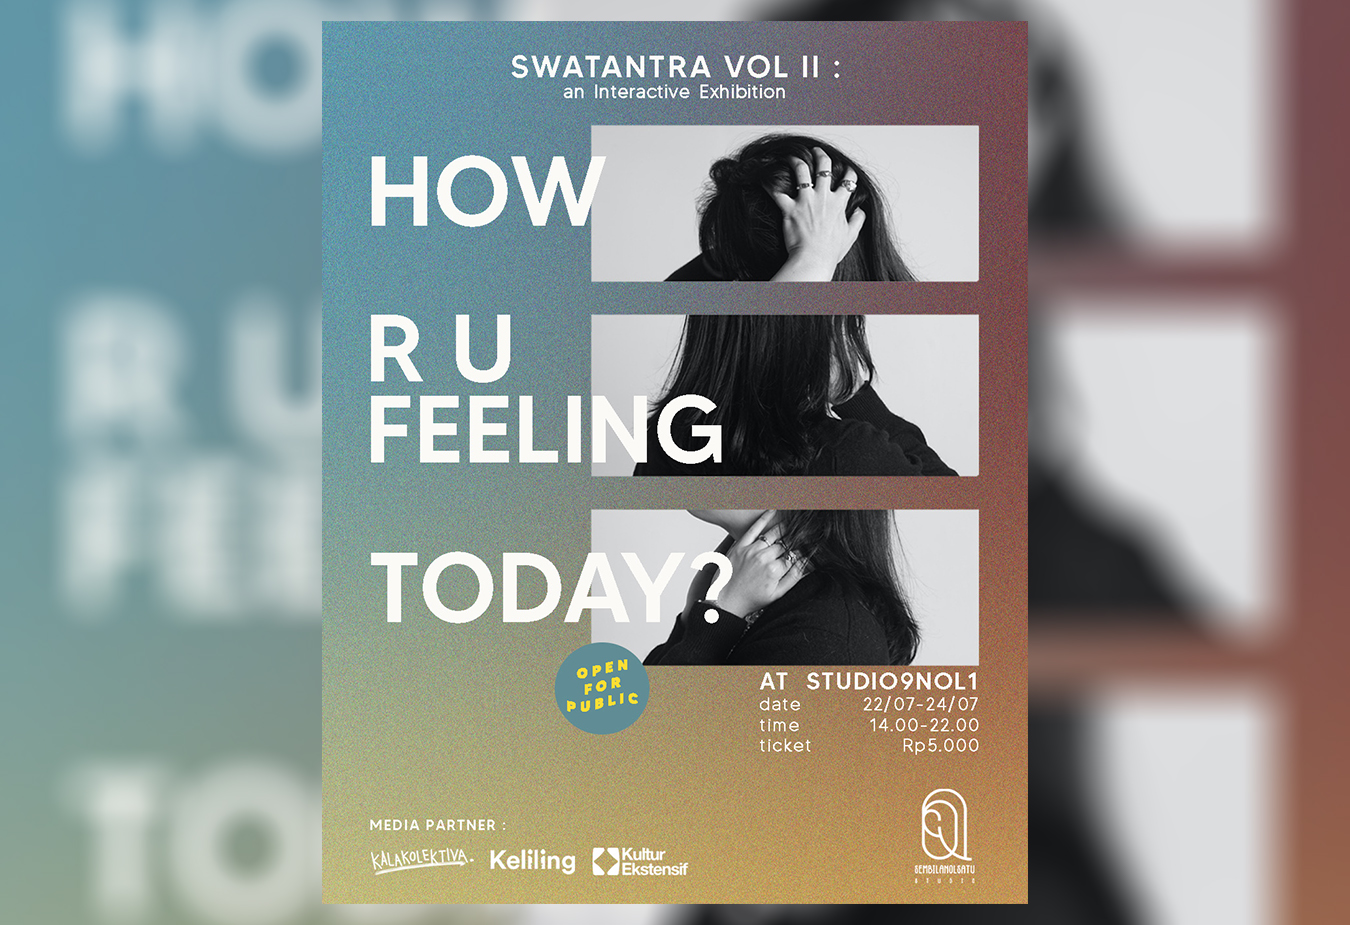 How R You Feeling Today: An Exhibition to Express Your Emotion